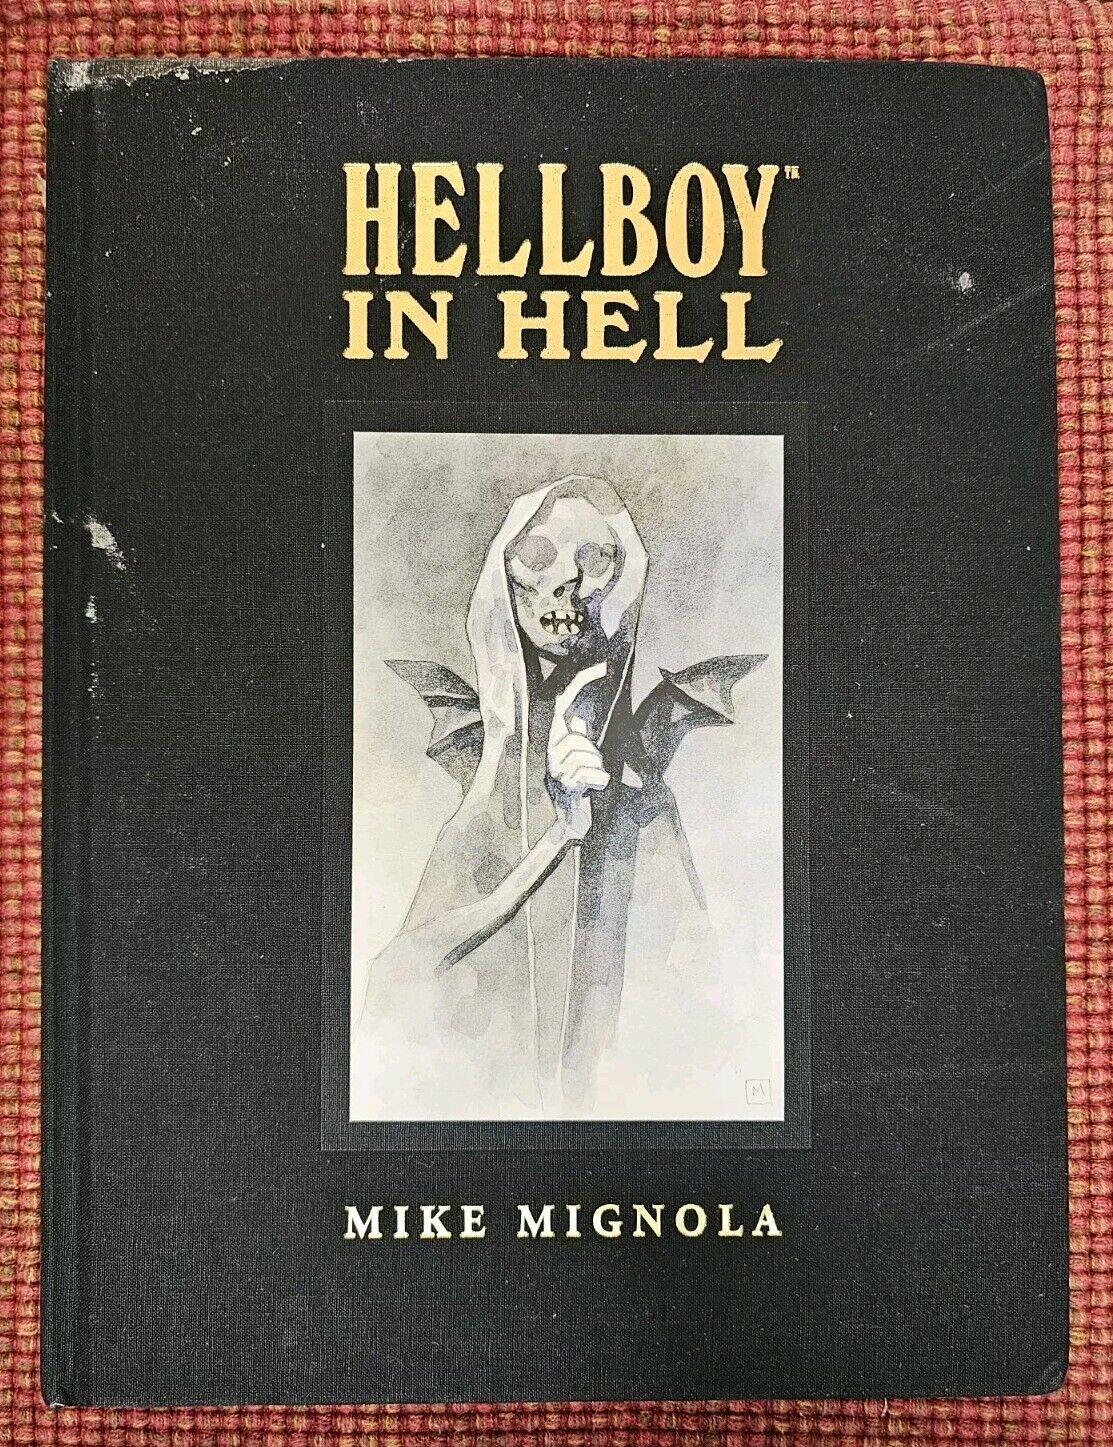 New: Hellboy in Hell, Library Edition Hardcover Mike Mignola *Cover Flaws